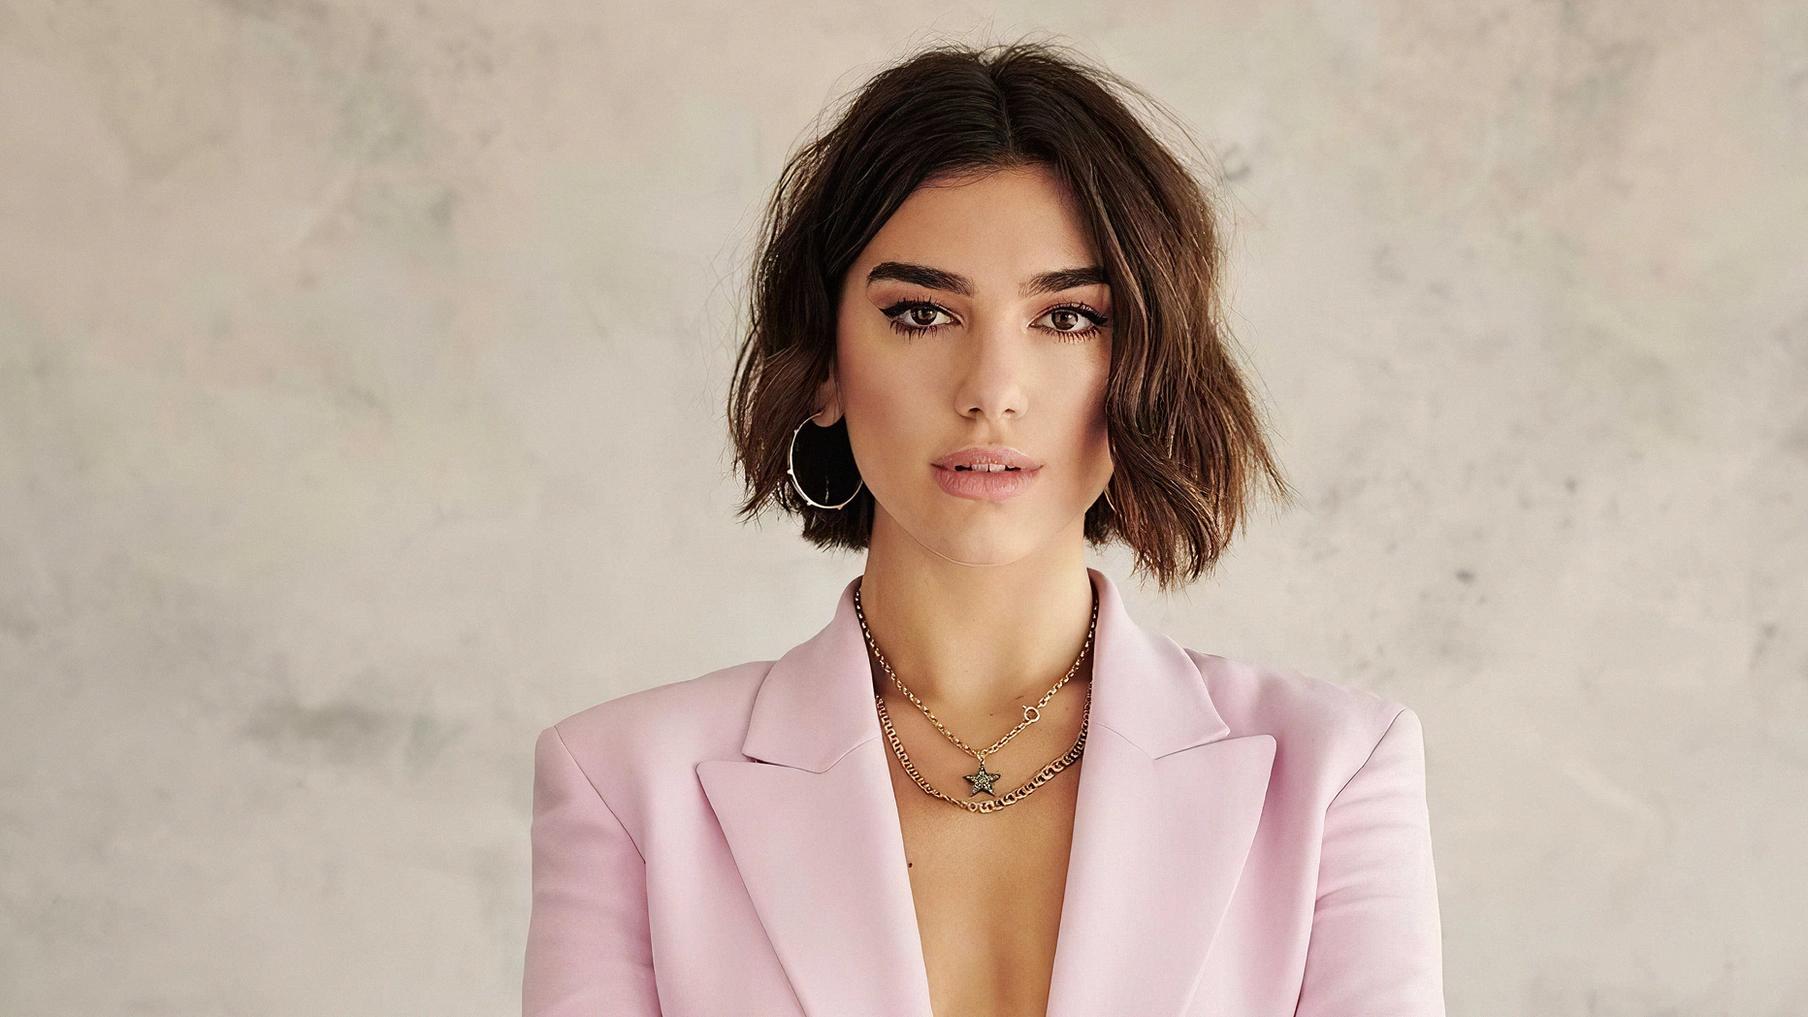 Singer Actor Dua Lipa in India- She is making the headlines for all the right reasons